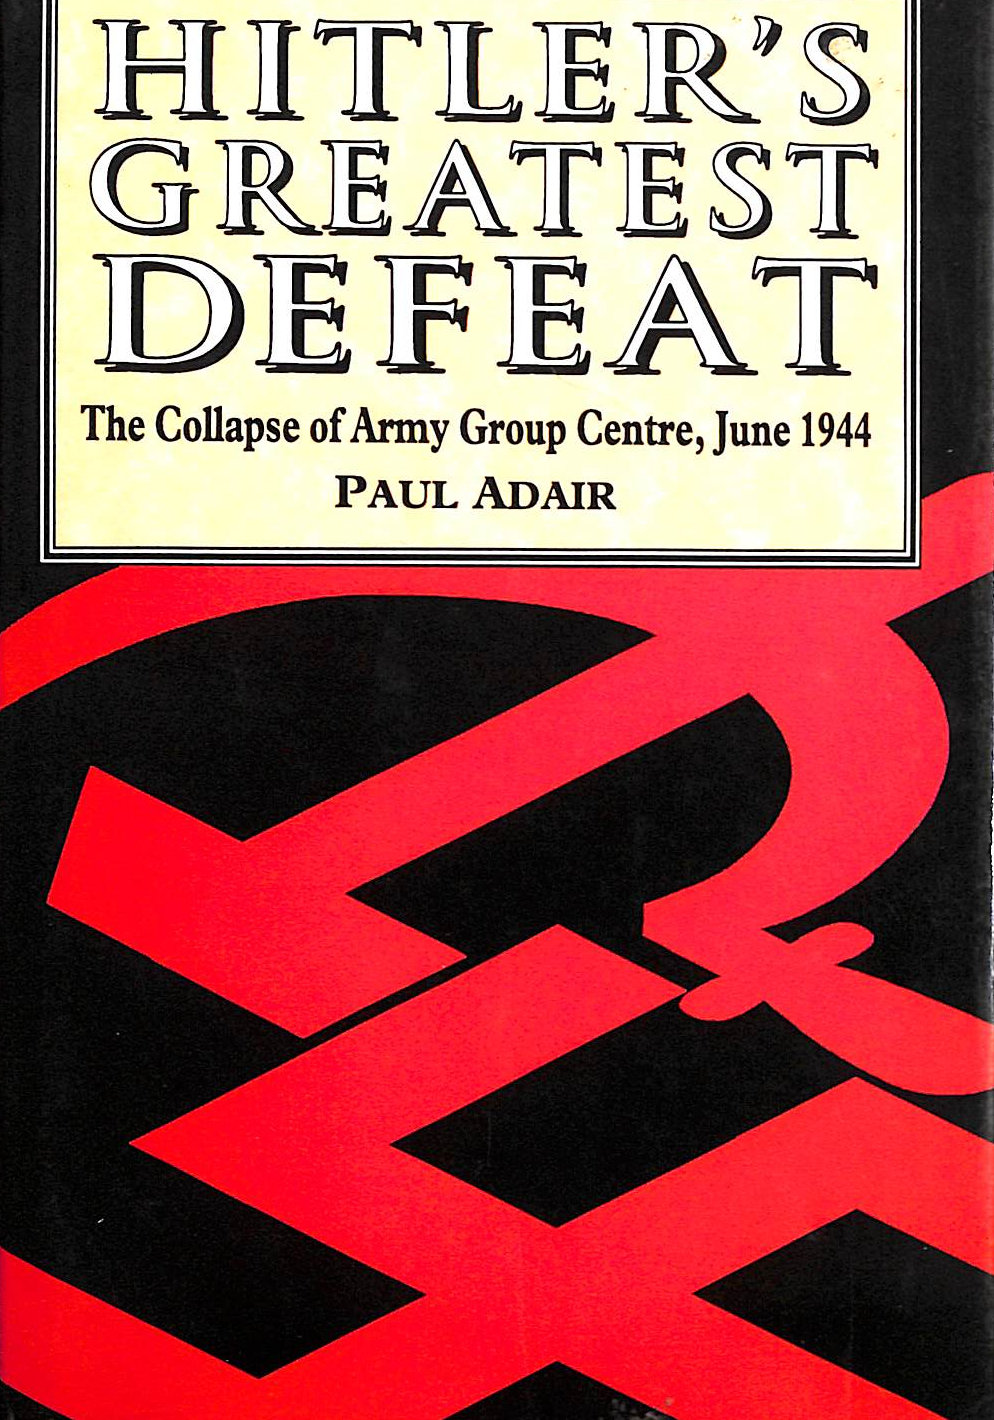 ADAIR, PAUL - Hitler's Greatest Defeat: The Collapse of Army Group Centre, June 1944